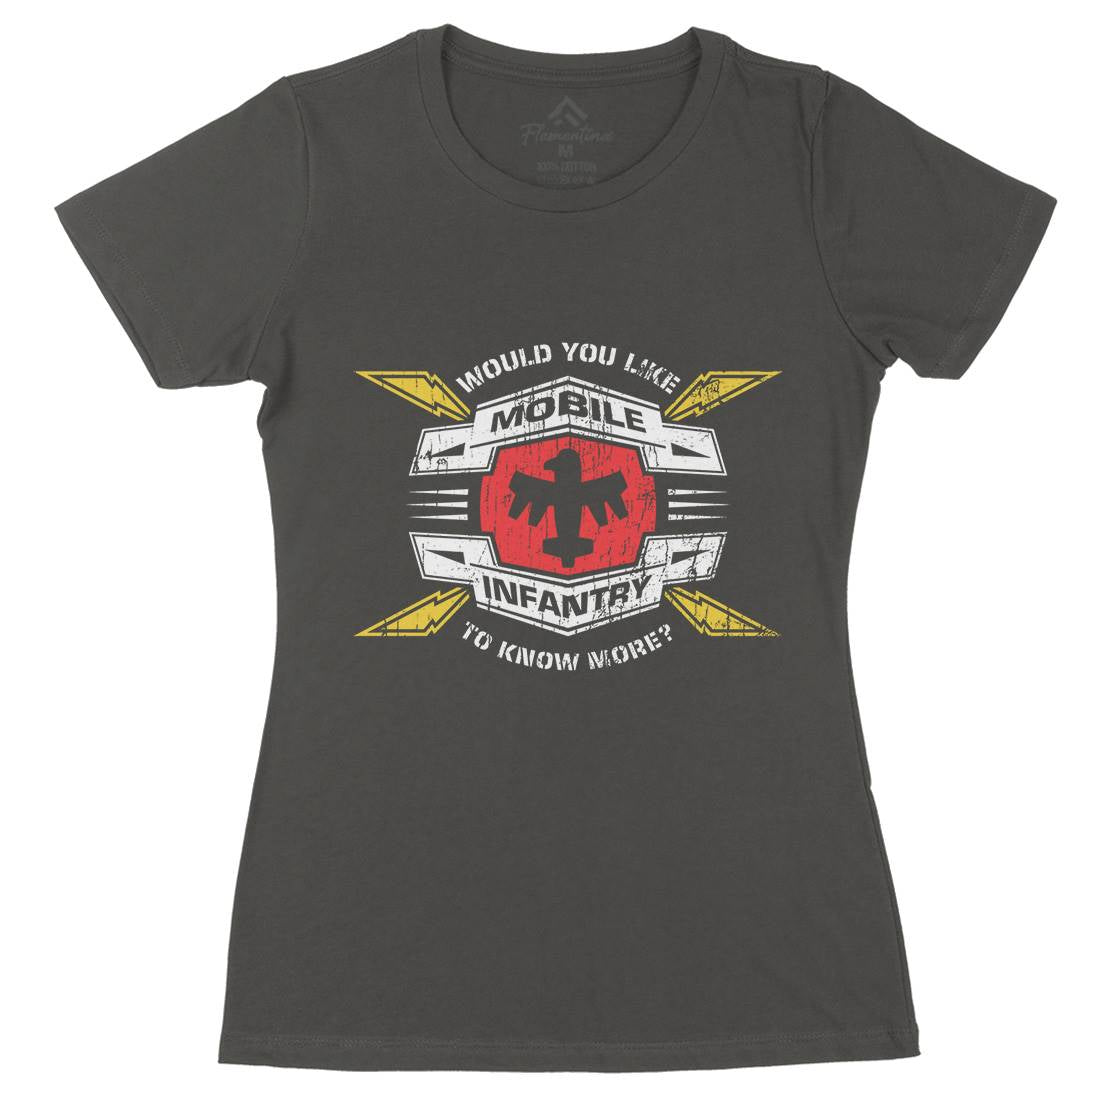 Mobile Infantry Womens Organic Crew Neck T-Shirt Army D270